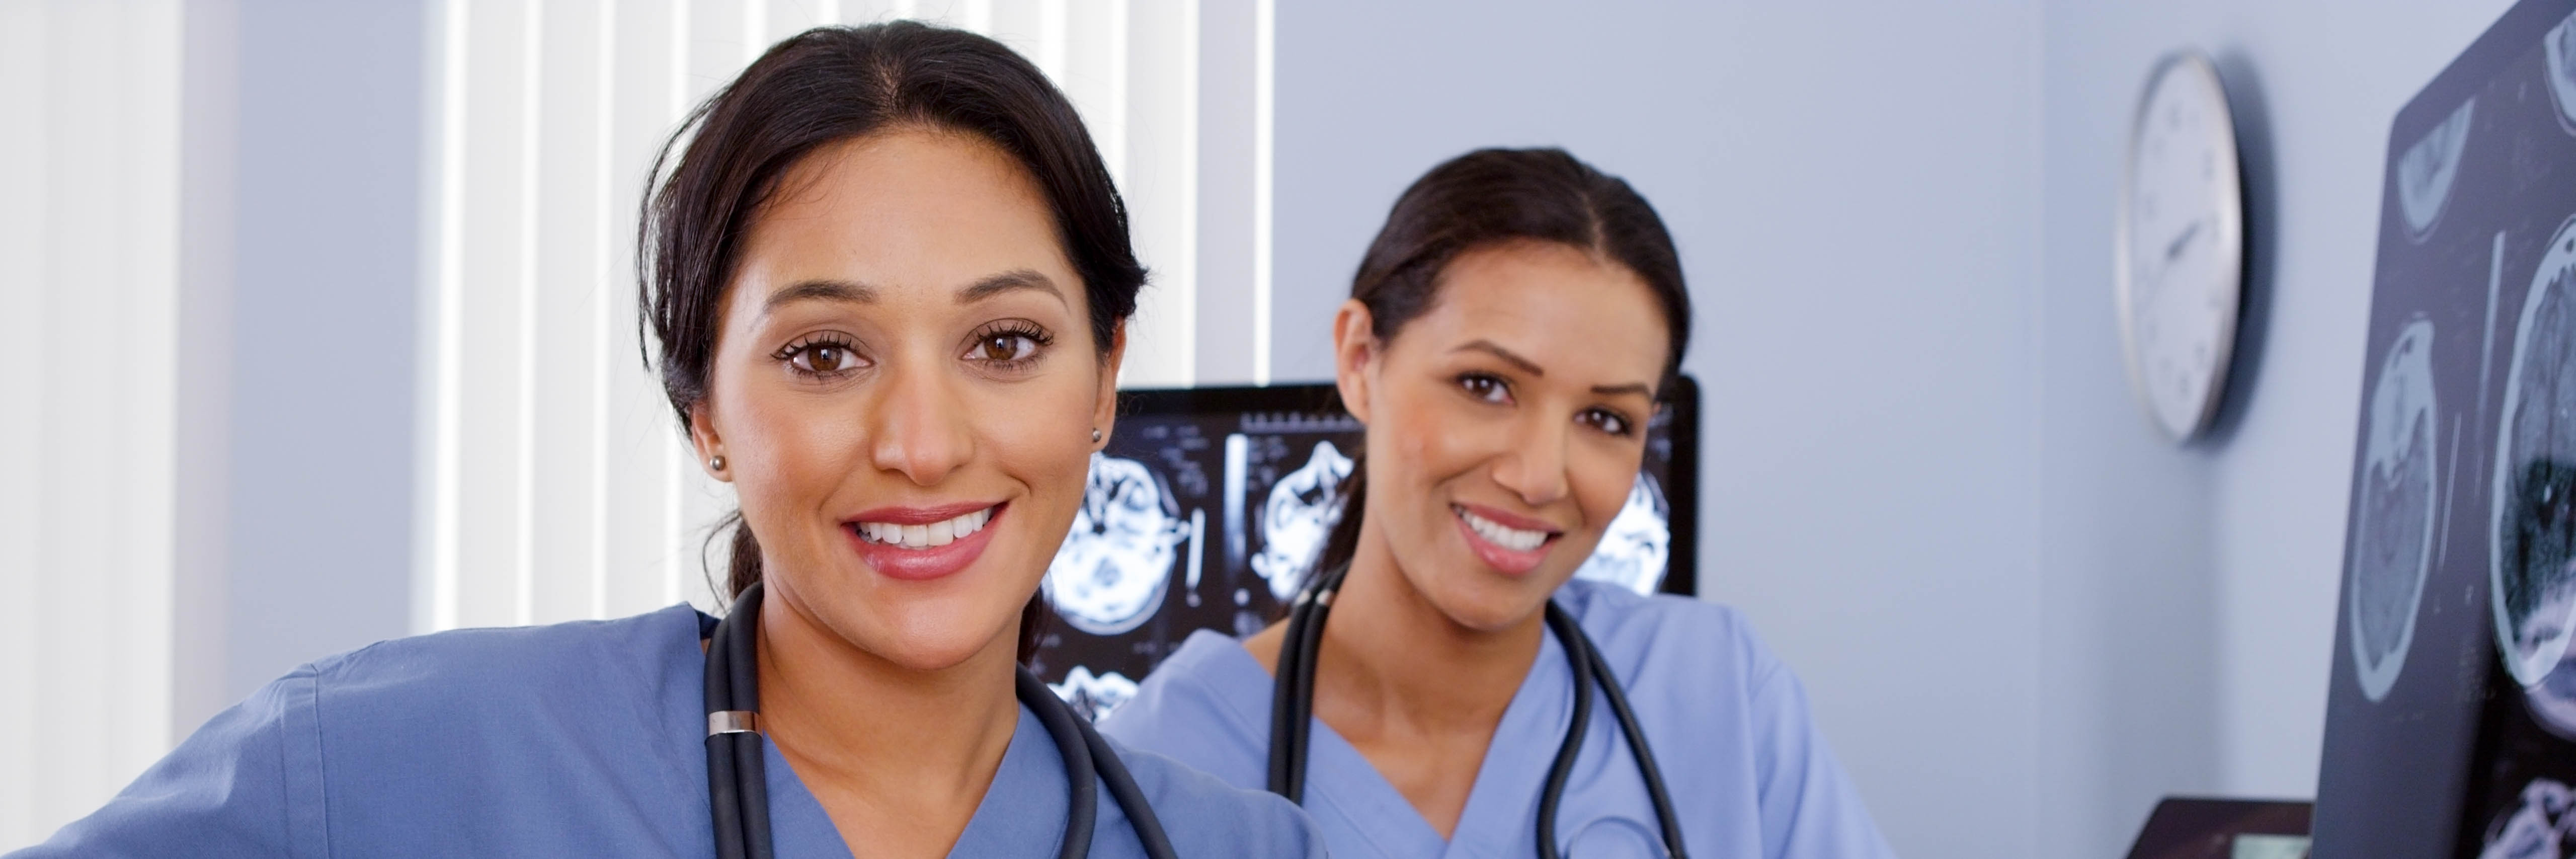 Two young women clinicians smiling, with stethoscopes around their necks, sitting at their work stations in front of brain scan x-ray images.